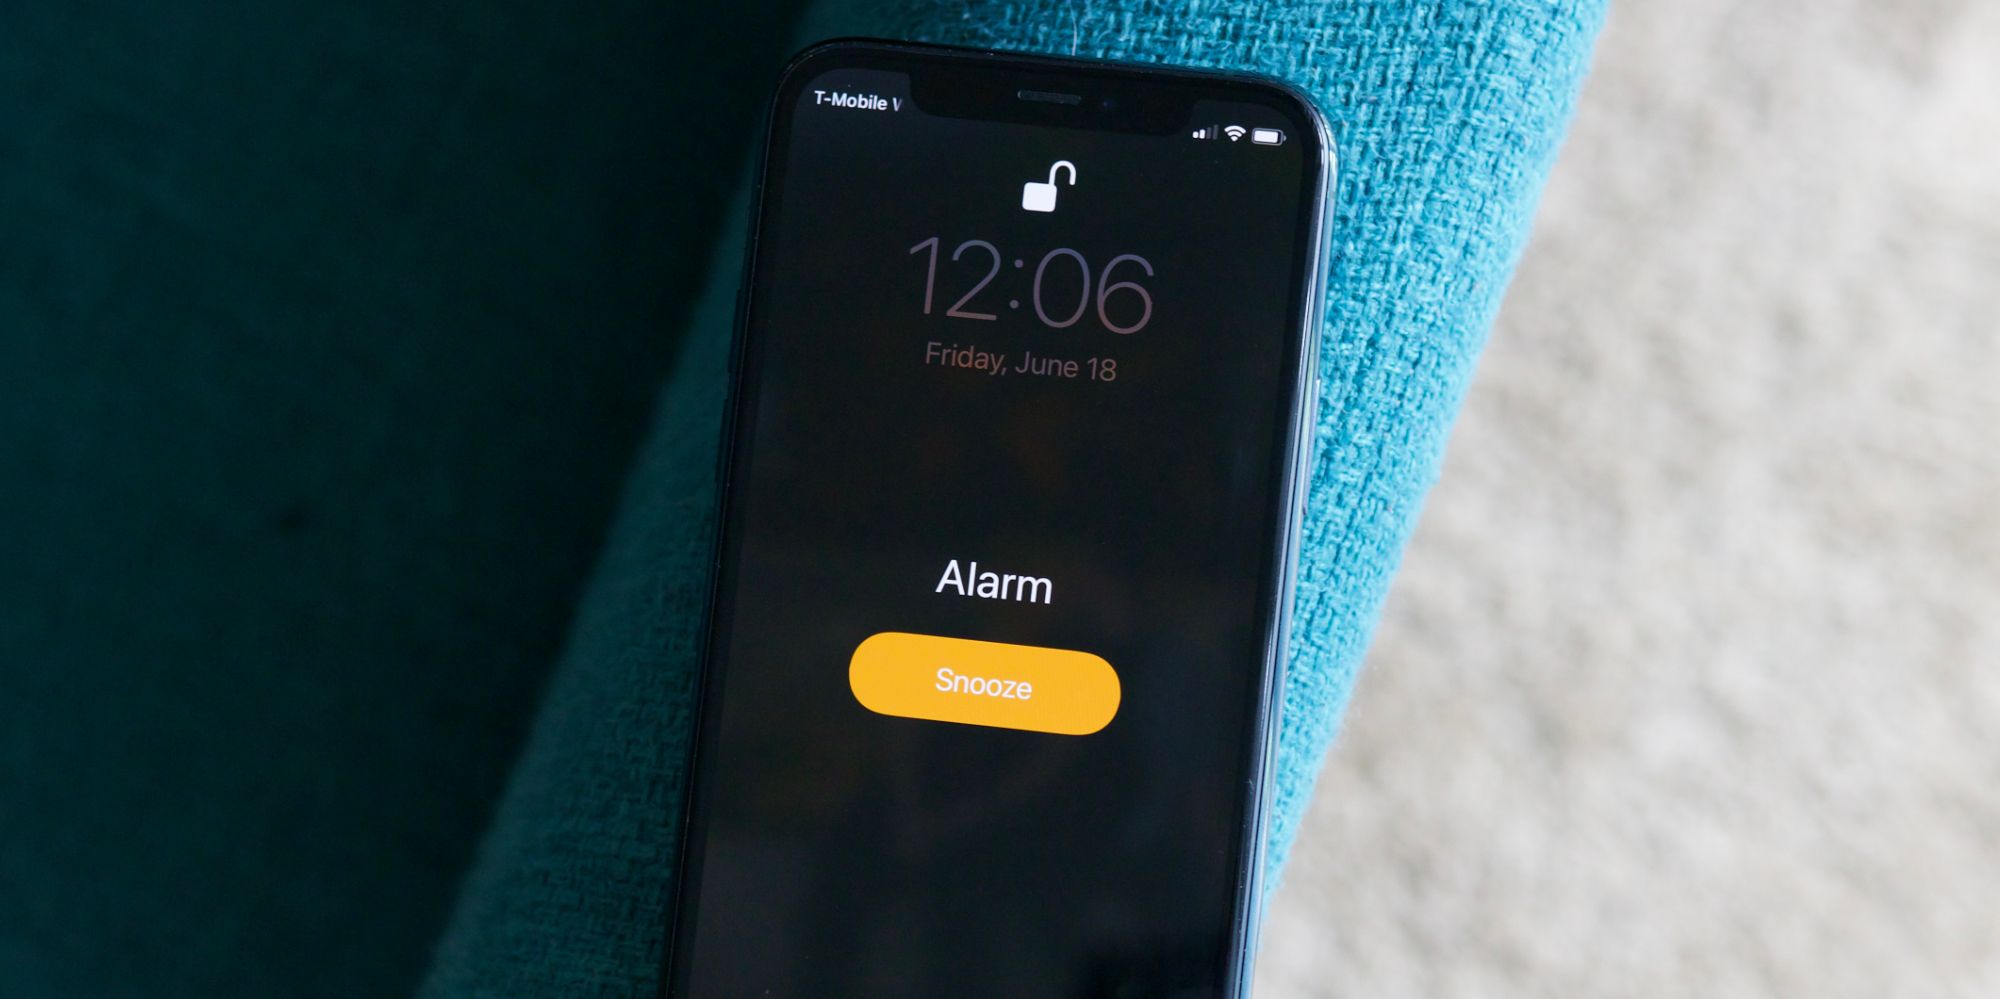 iPhone alarm with the snooze button